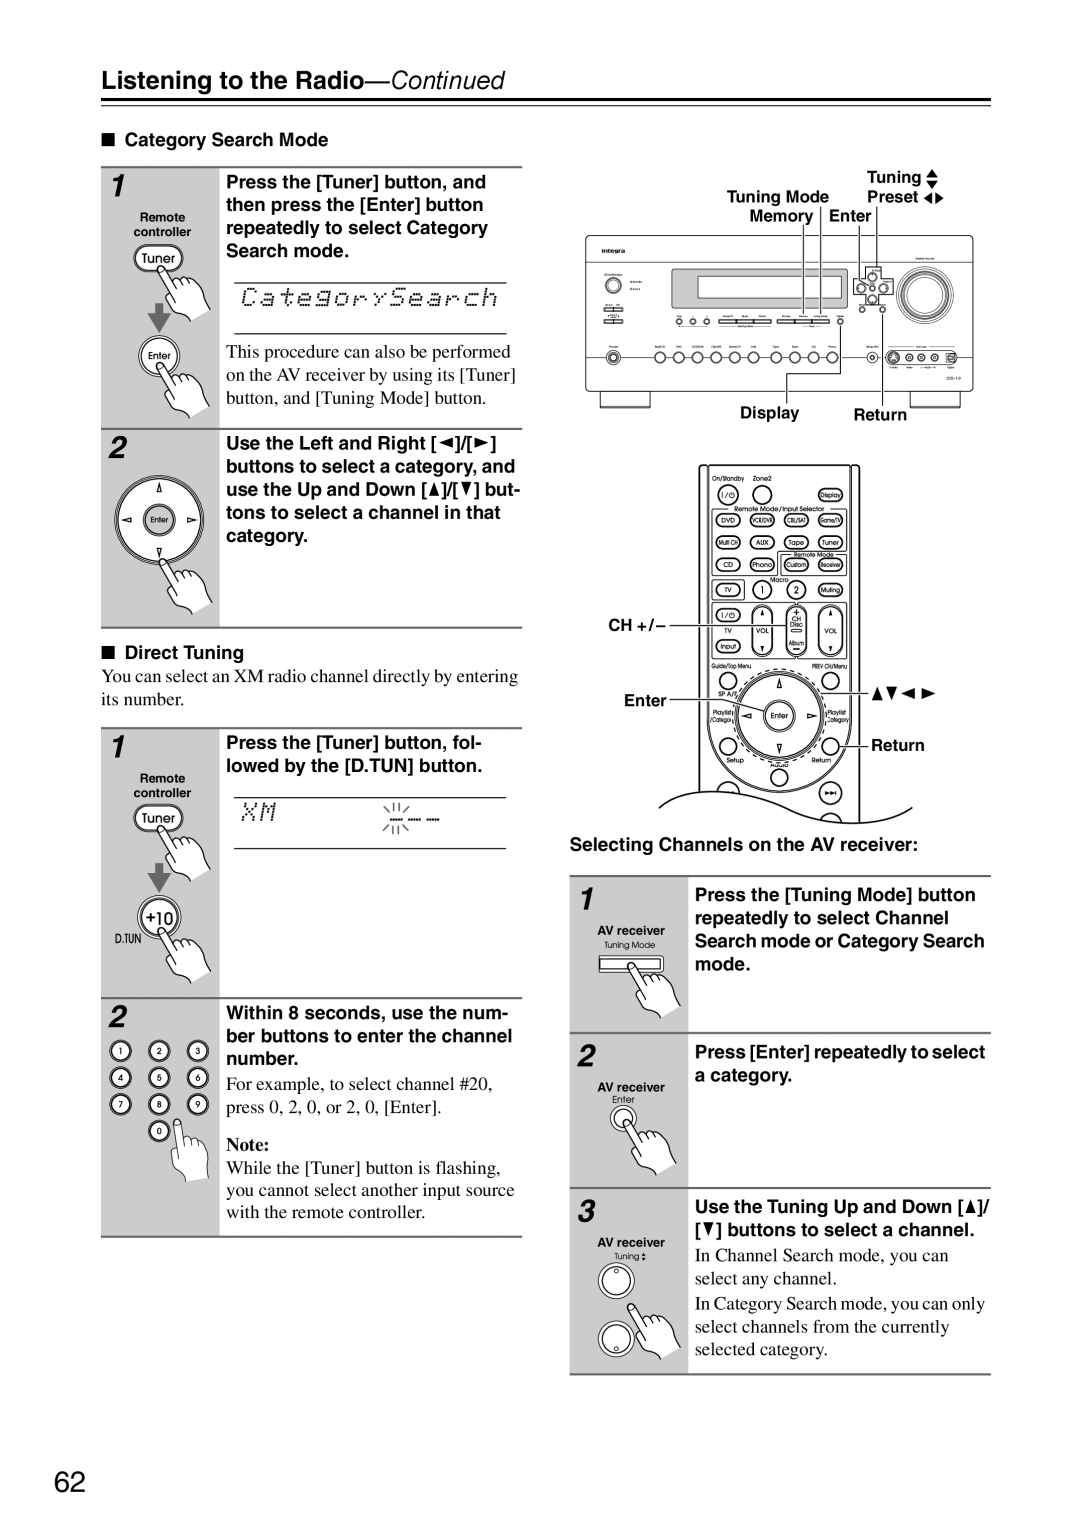 Onkyo DTR-7.9 instruction manual Listening to the Radio—Continued, Category Search Mode 